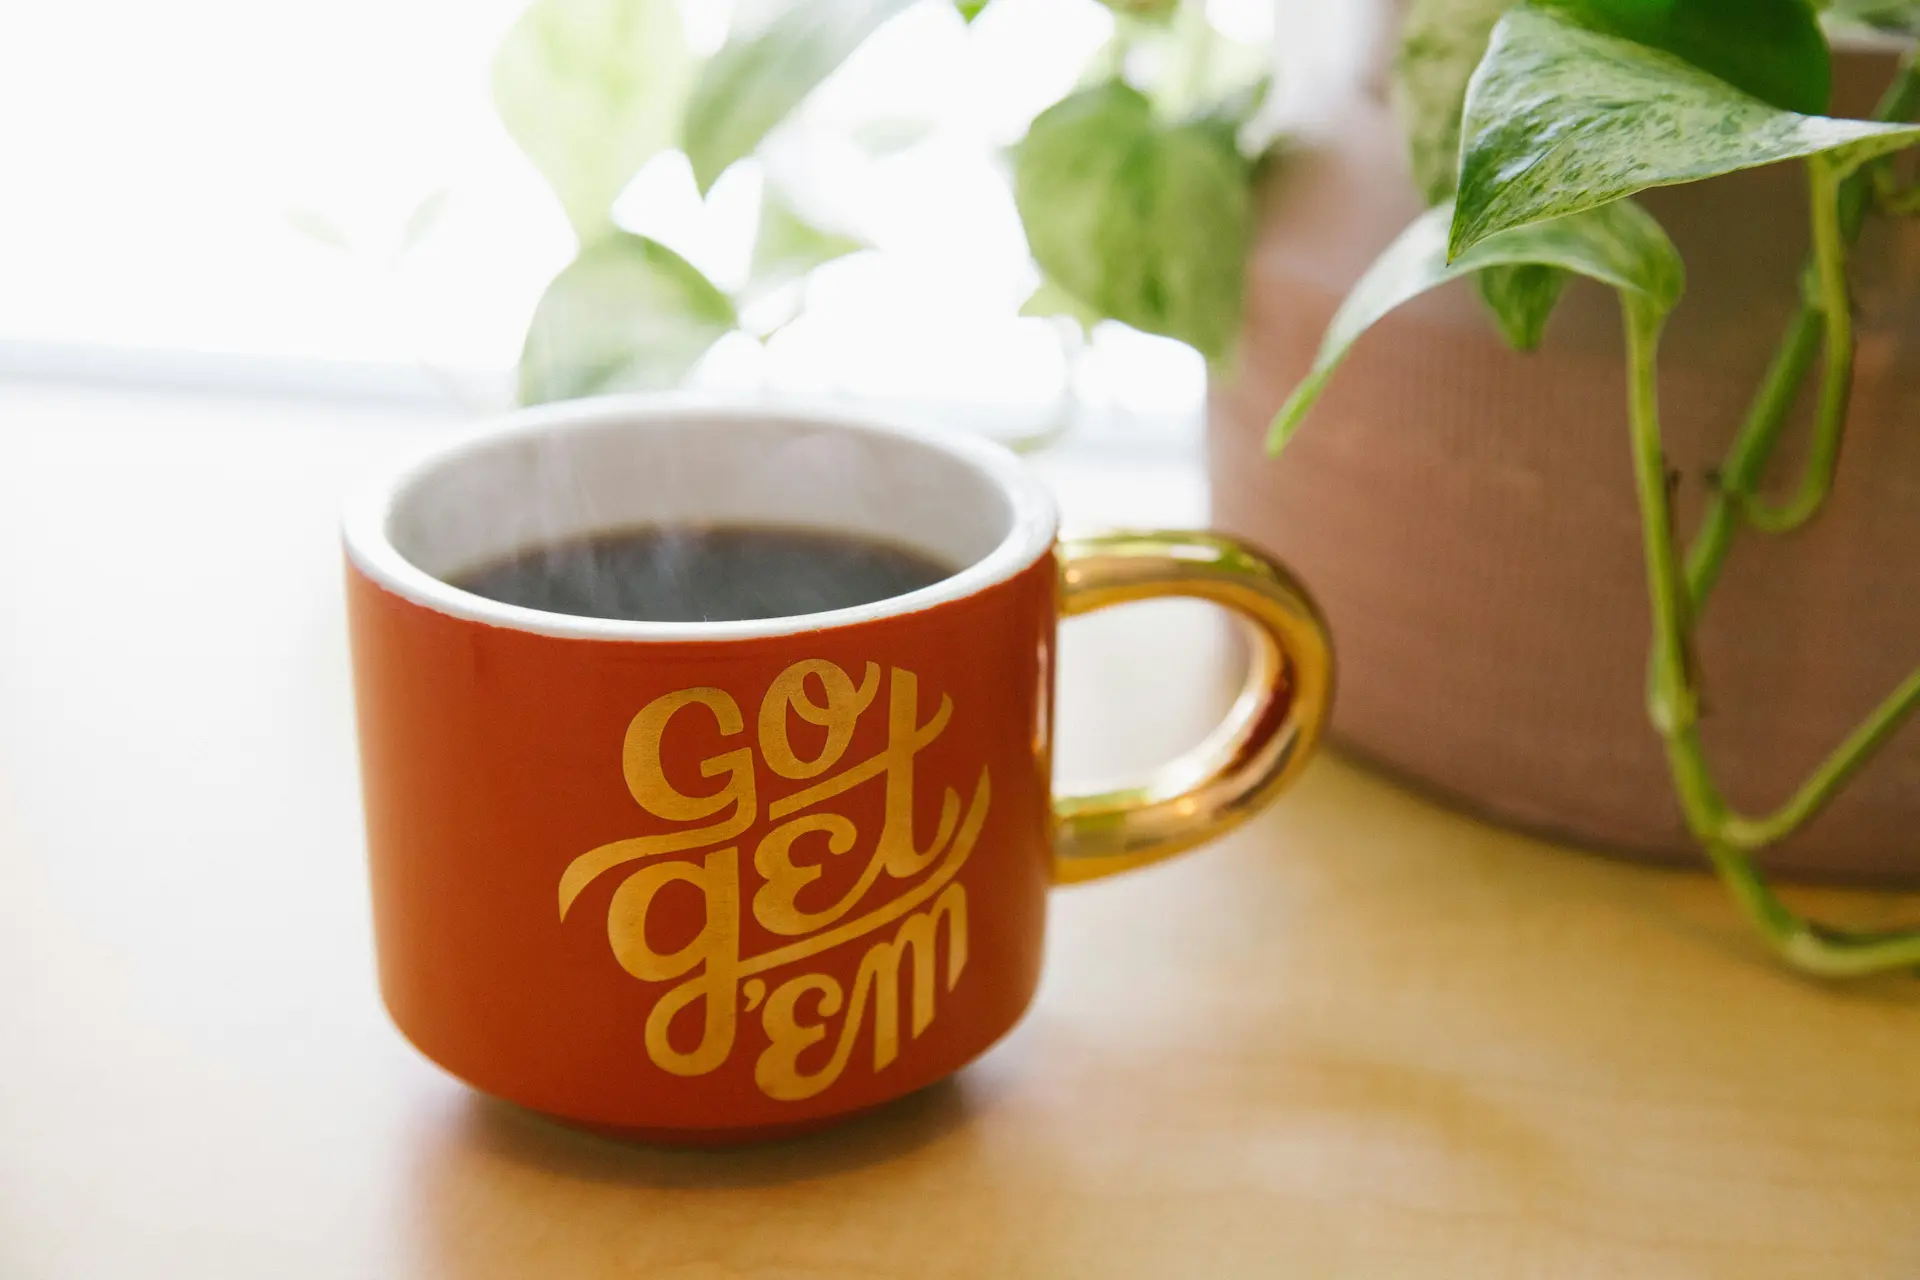 Red mug with yellow writing on it that says go get'em! It has steaming coffee in it. Pot of plant next to it.